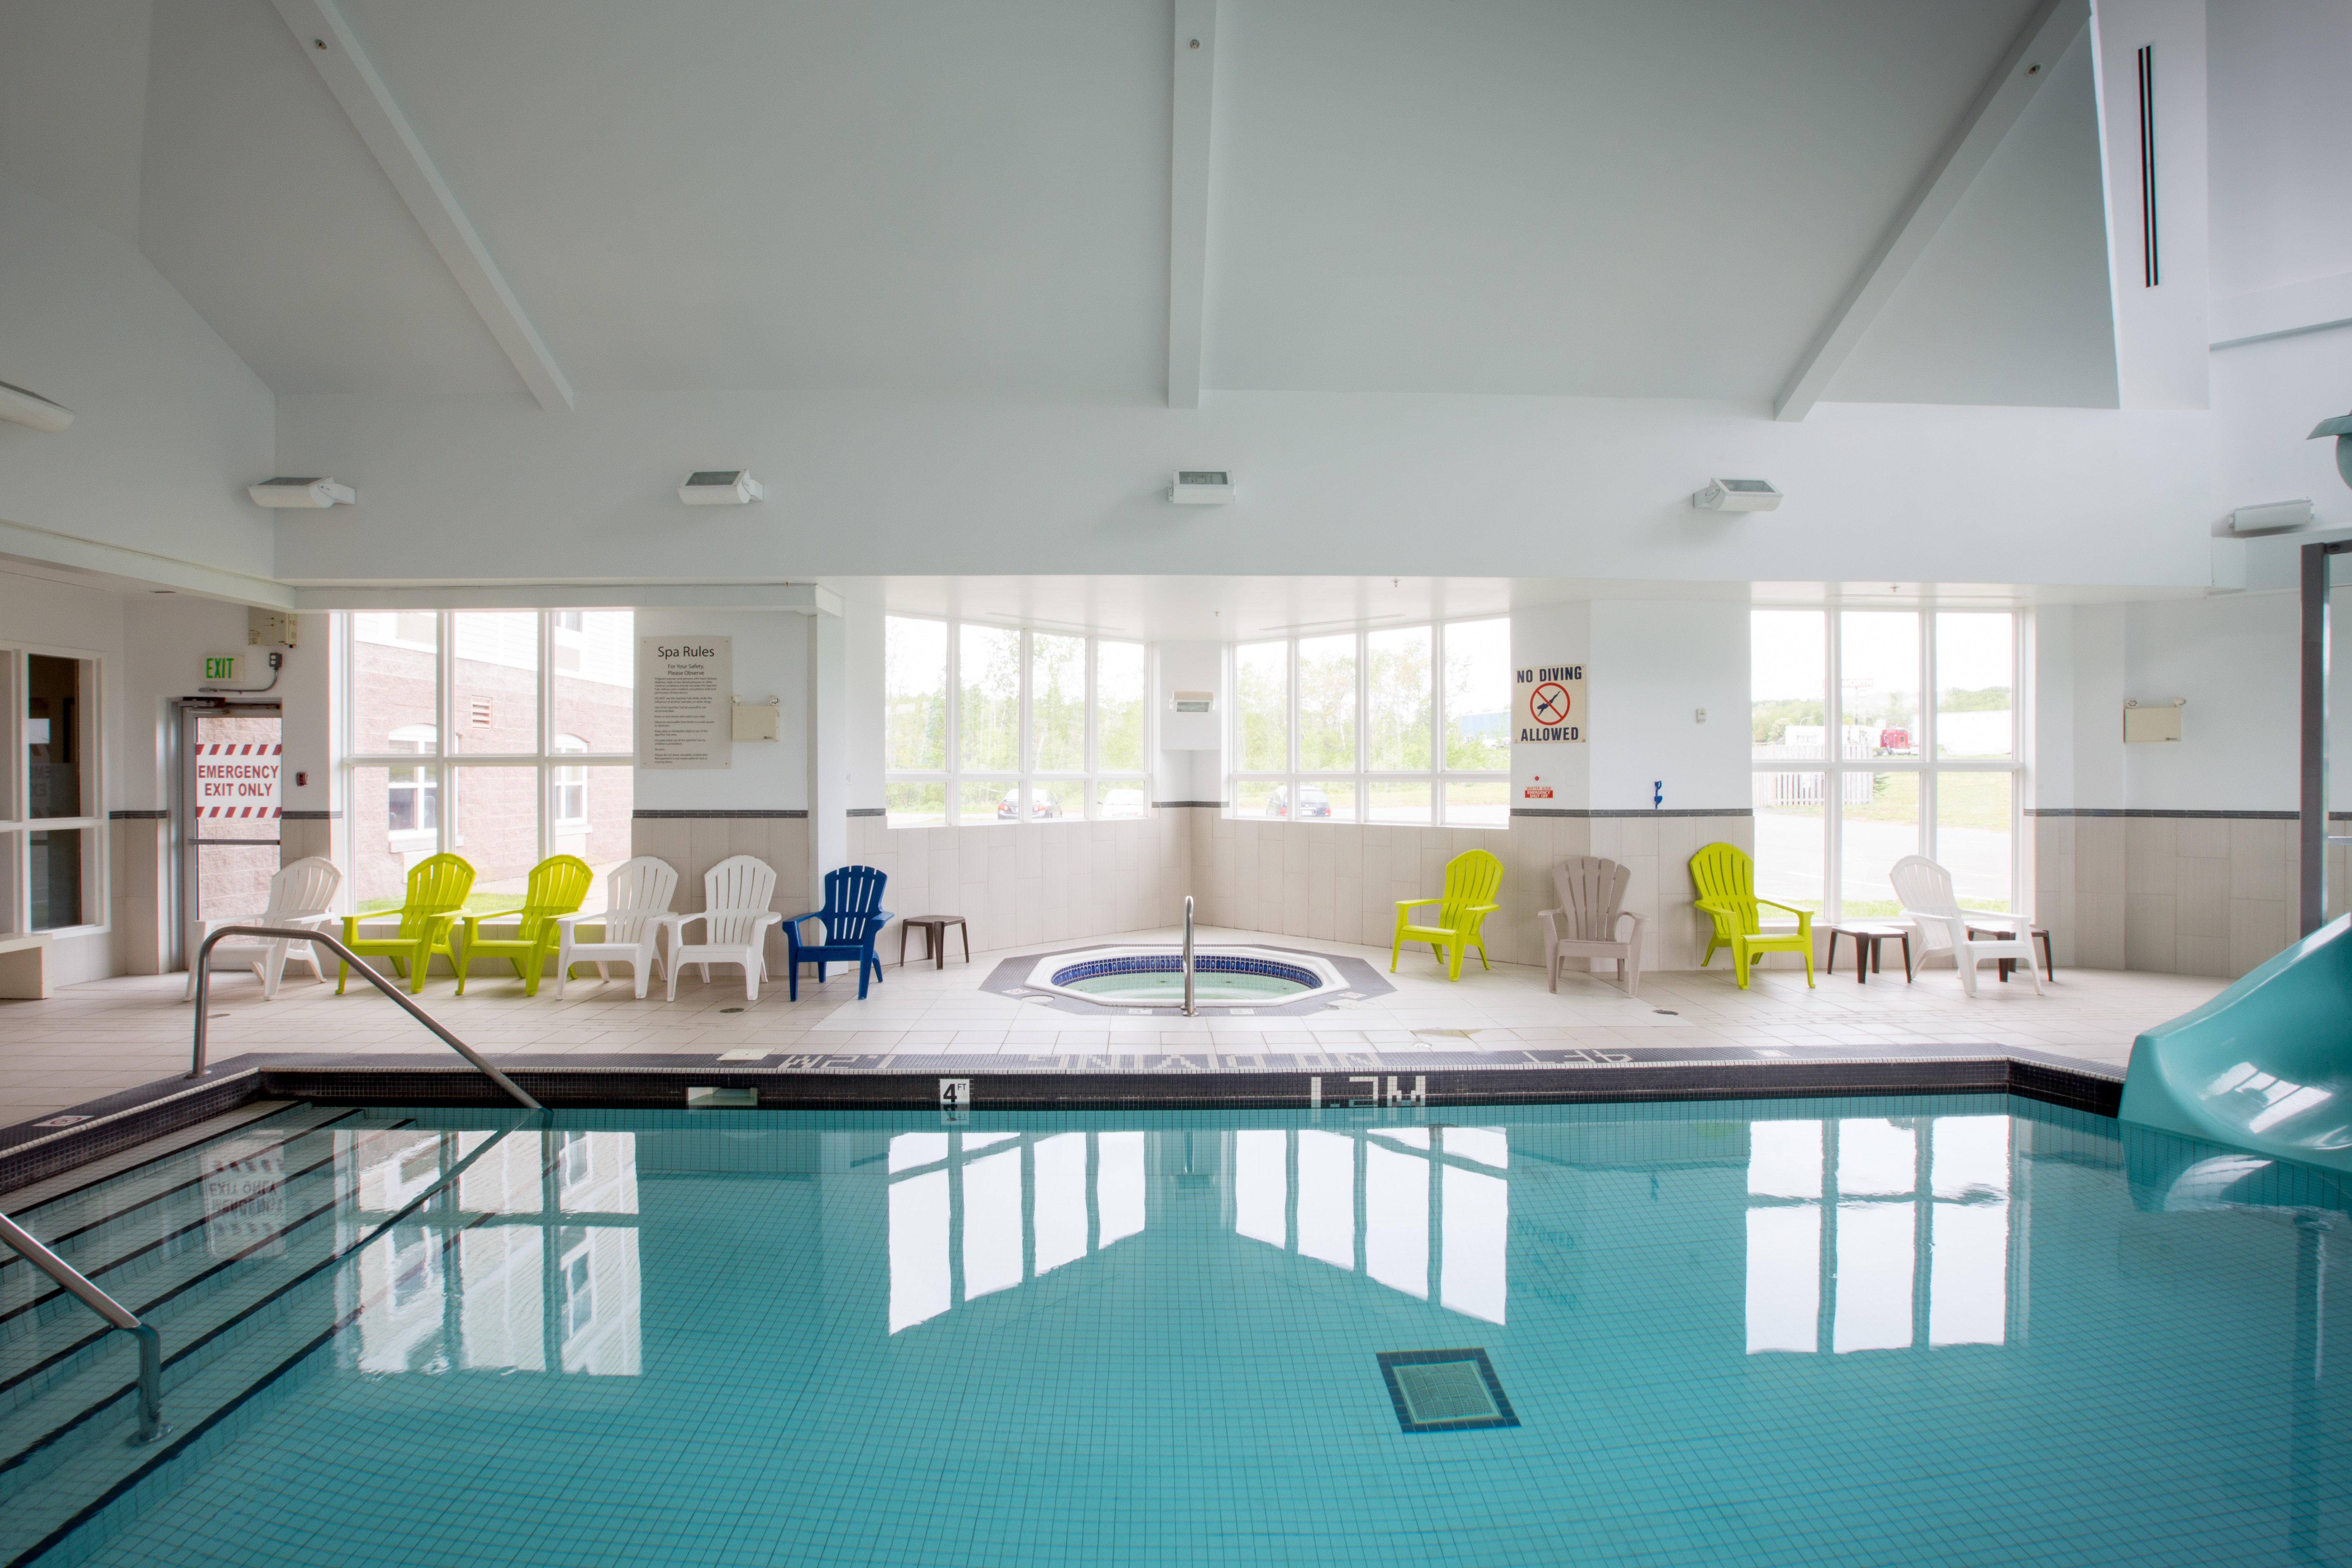 Splash around and have fun in our indoor heated pool